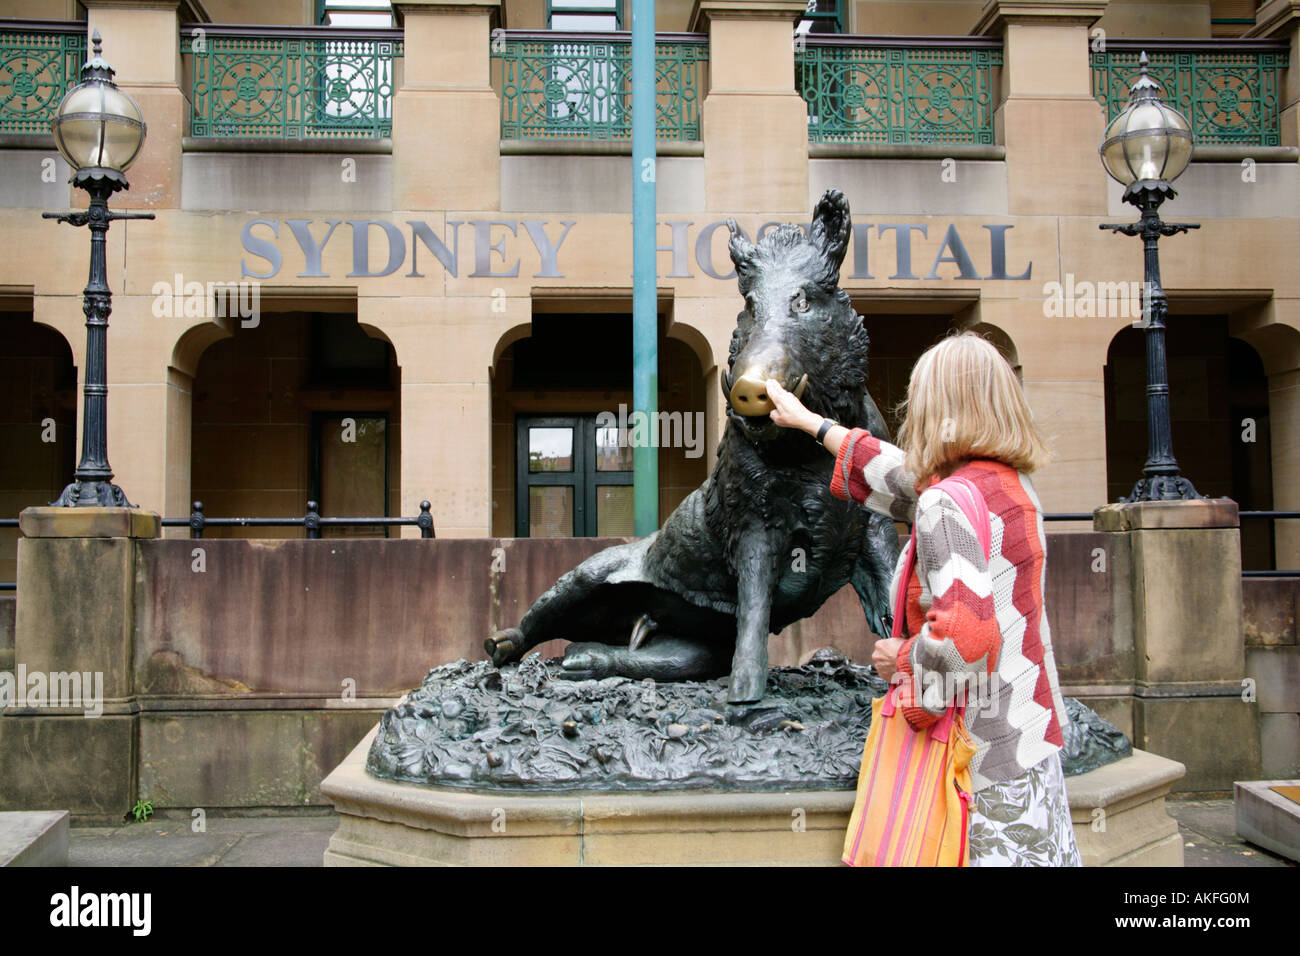 Sculpture of Il Porcellino,wild boar outside Sydney hospital with female tourist rubbing nose for good fortune. Stock Photo